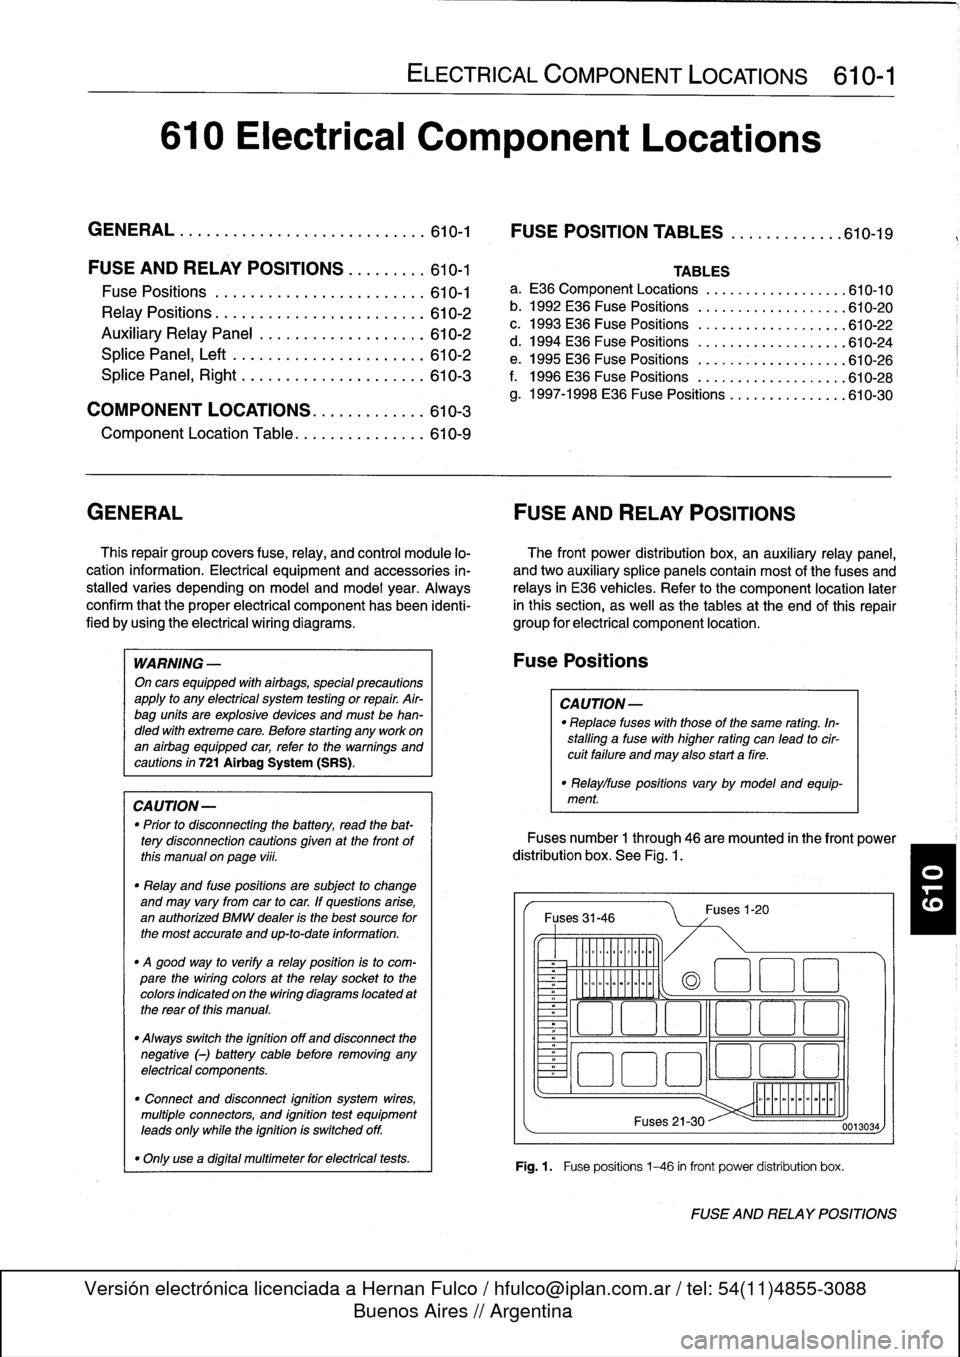 BMW 323i 1995 E36 Workshop Manual 
610
Electrical
Component
Locations

GENERAL
...........
.
.
.
.
.
.
.
.
.
........
610-1

	

FOSE
POSITION
TABLES
..
.
.
.
.
.
.....
.
610-19

FUSE
AND
RELAY
POSITIONS
.
...
.
.
.
.
.
610-1

Fuse
Pos